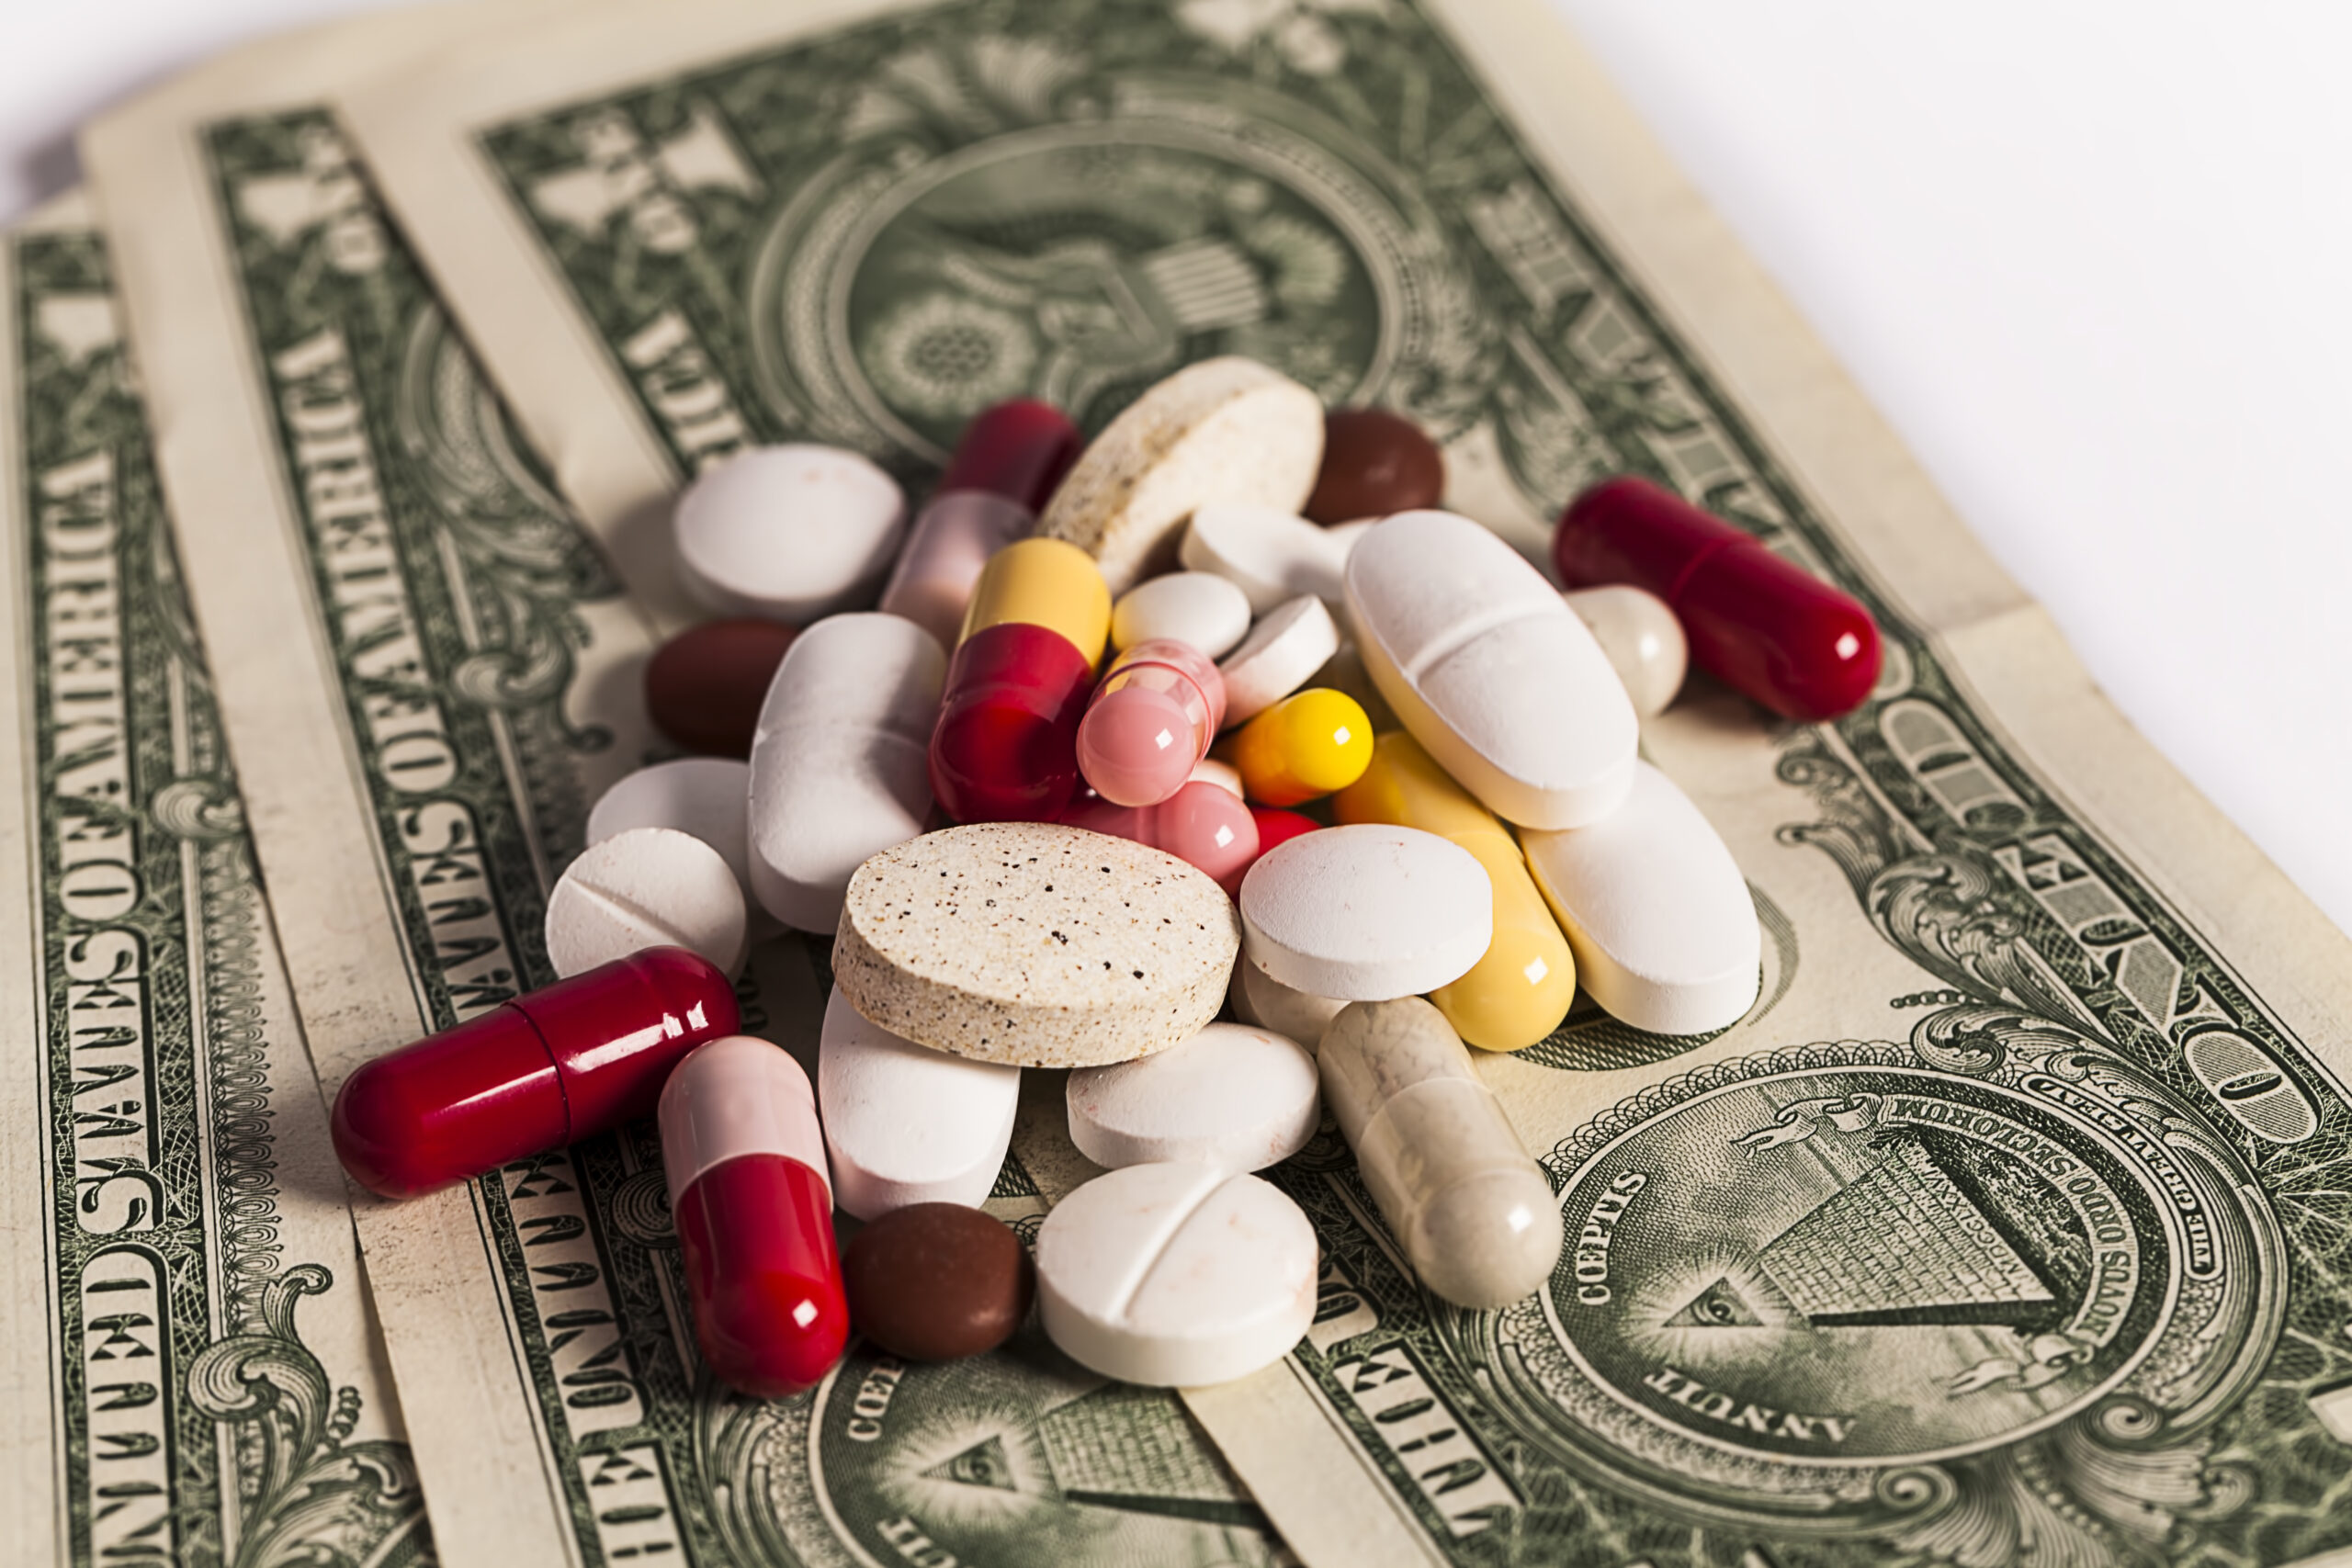 Sept. 2020 Executive Order To Lower Drug Prices